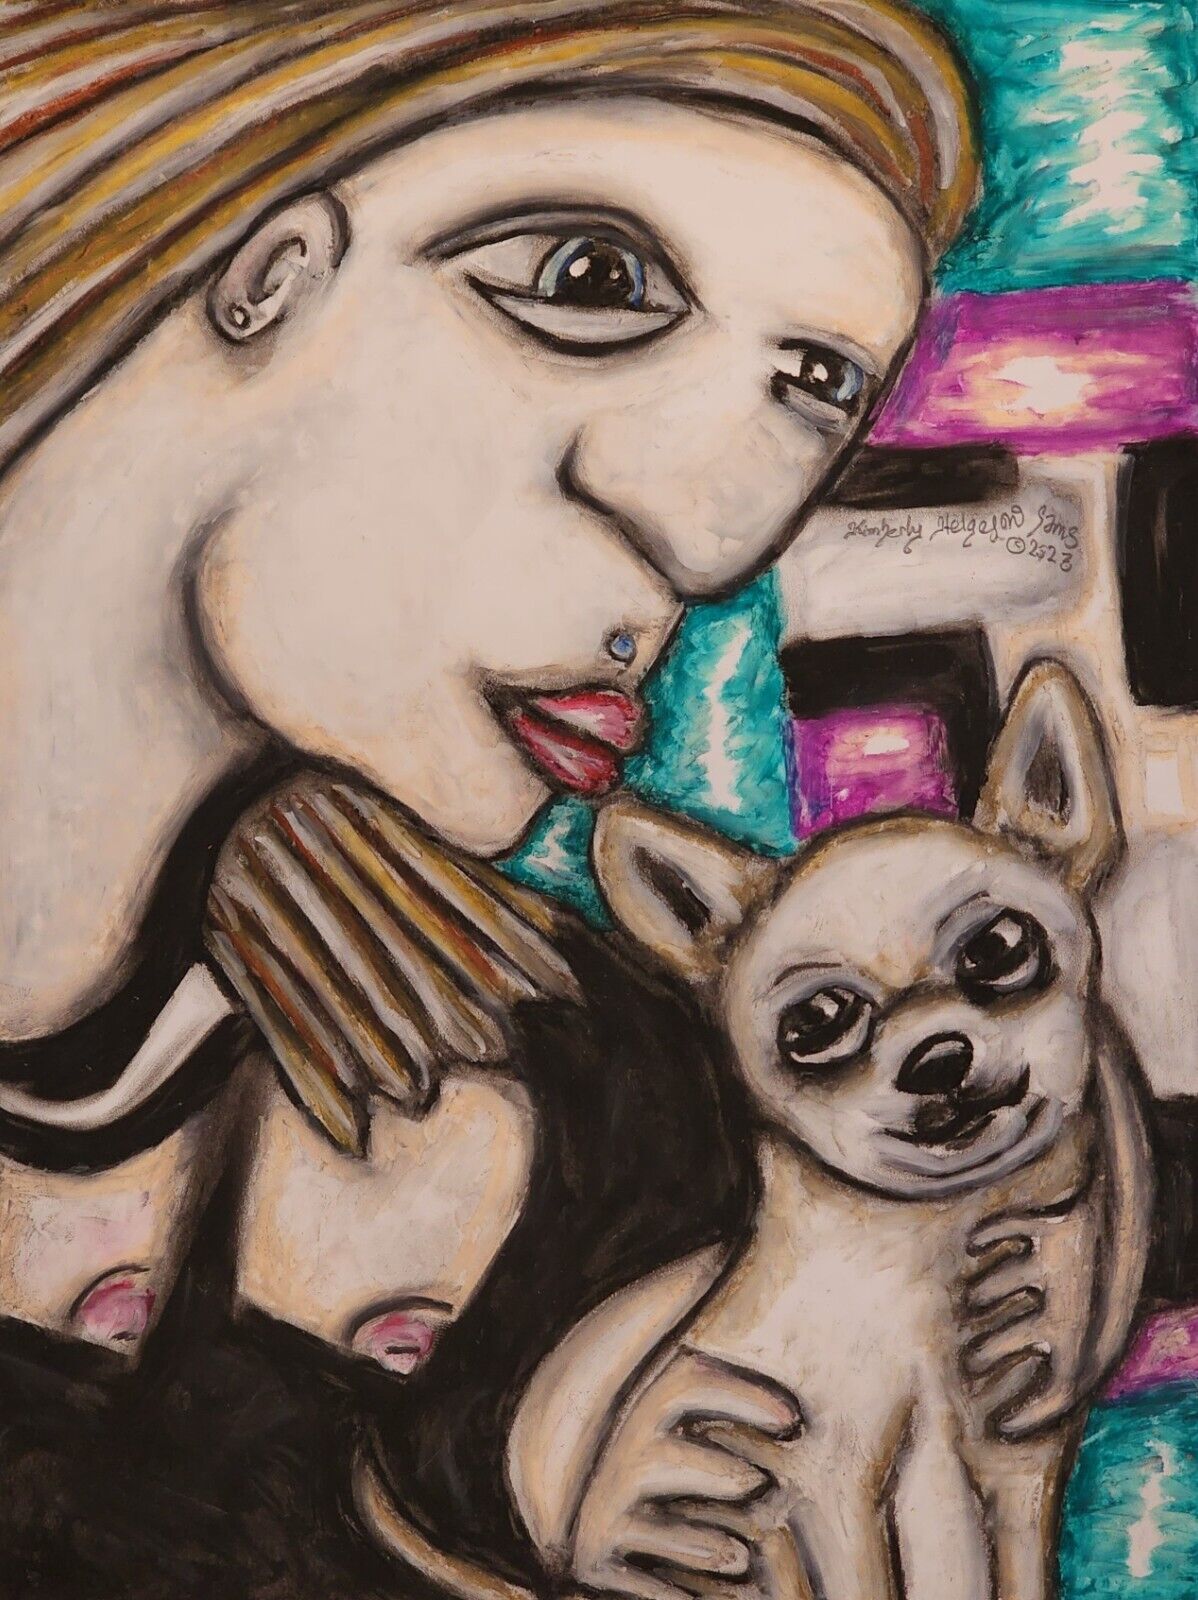 WOMAN and CHIHUAHUA Giclee Art Print 13 x 19 Signed Artist KSams CUBISM ABSTRACT